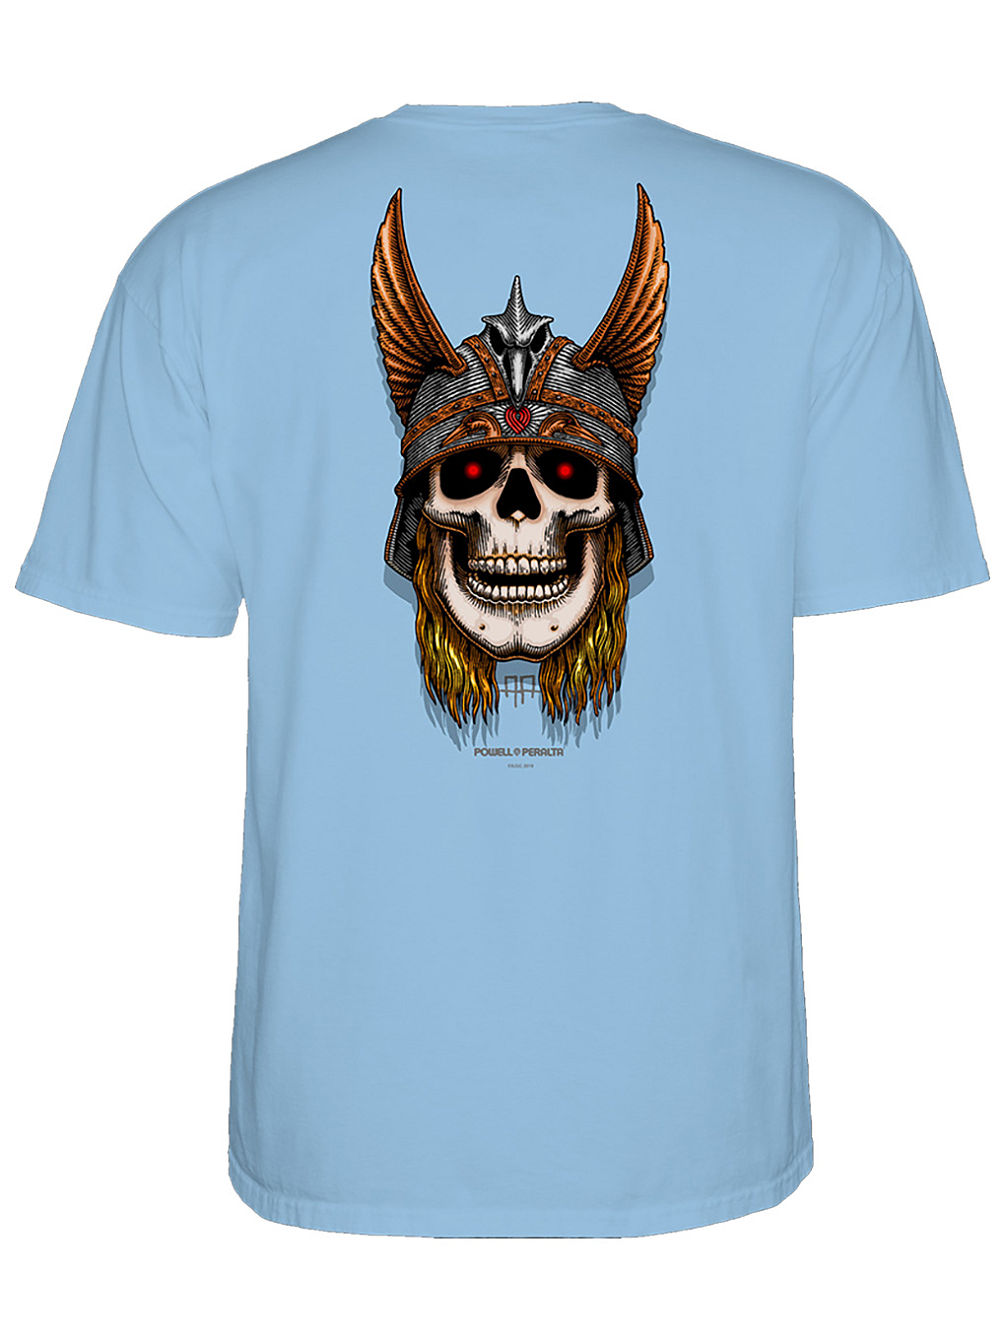 Andy Anderson Skull T-Shirt